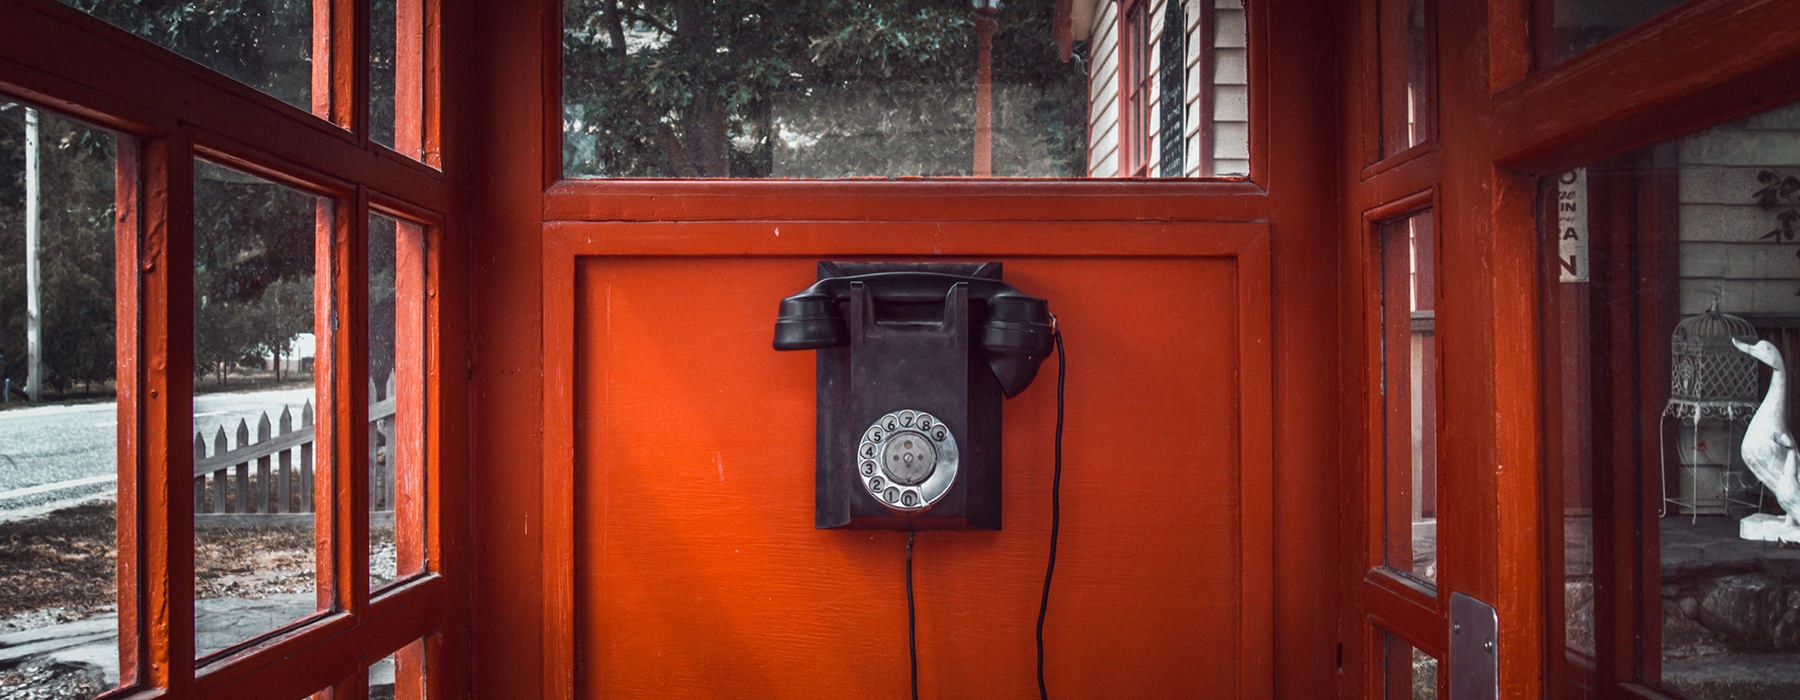 Old style phone 